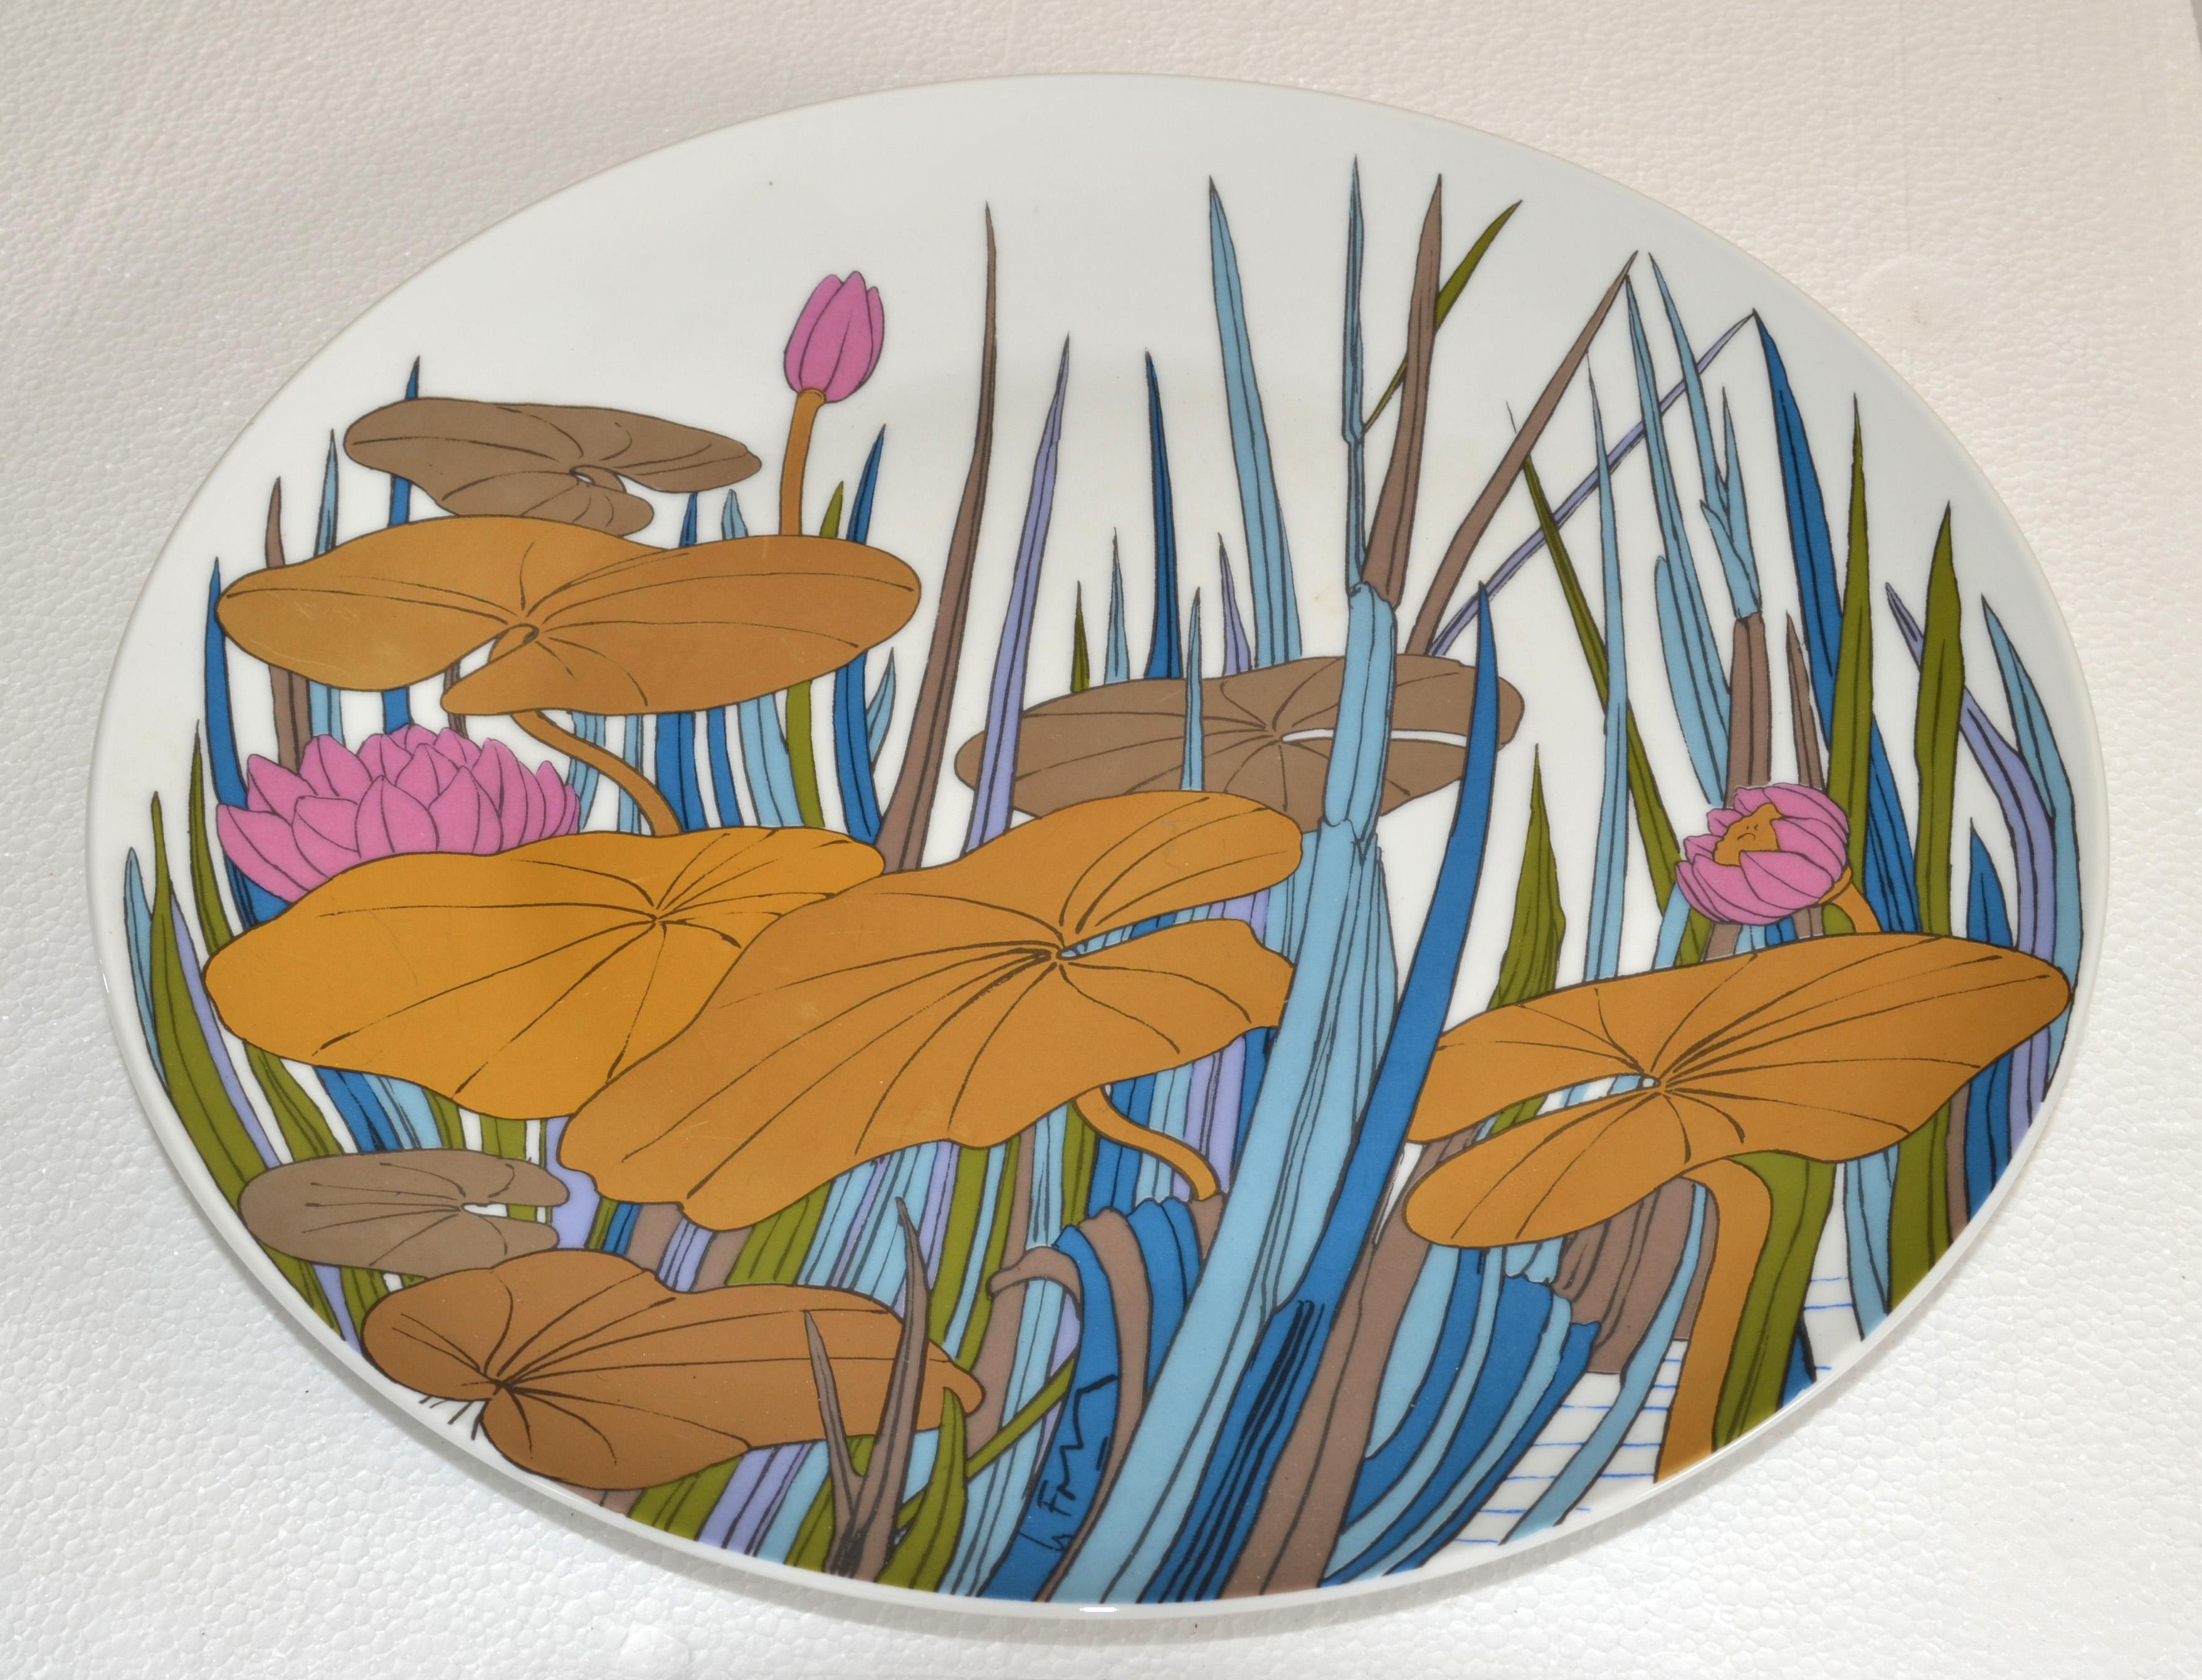 Striking original Rosenthal porcelain hand painted flower plate designed by Wolfgang Bauer and made in Germany for Studio-Linie.
This 100 Years Anniversary Collectable Wall Plate features multi-color floral branch outlined in gold.
Marked Rosenthal